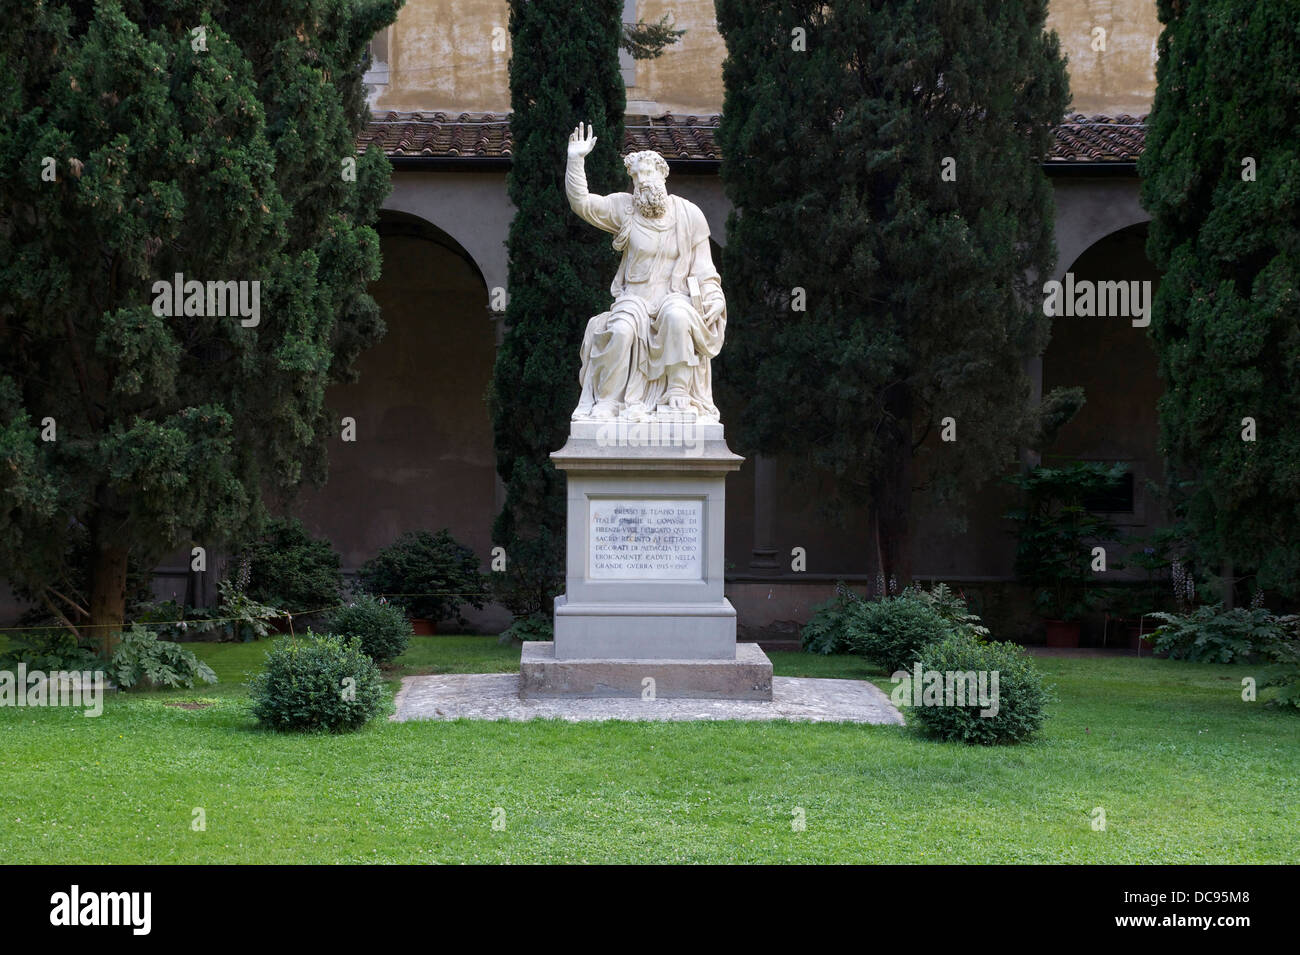 A monument to the florentines fallen during the WW1. God the Father, by Bandinelli. Santa Croce cloister, Florence, Italy. Stock Photo